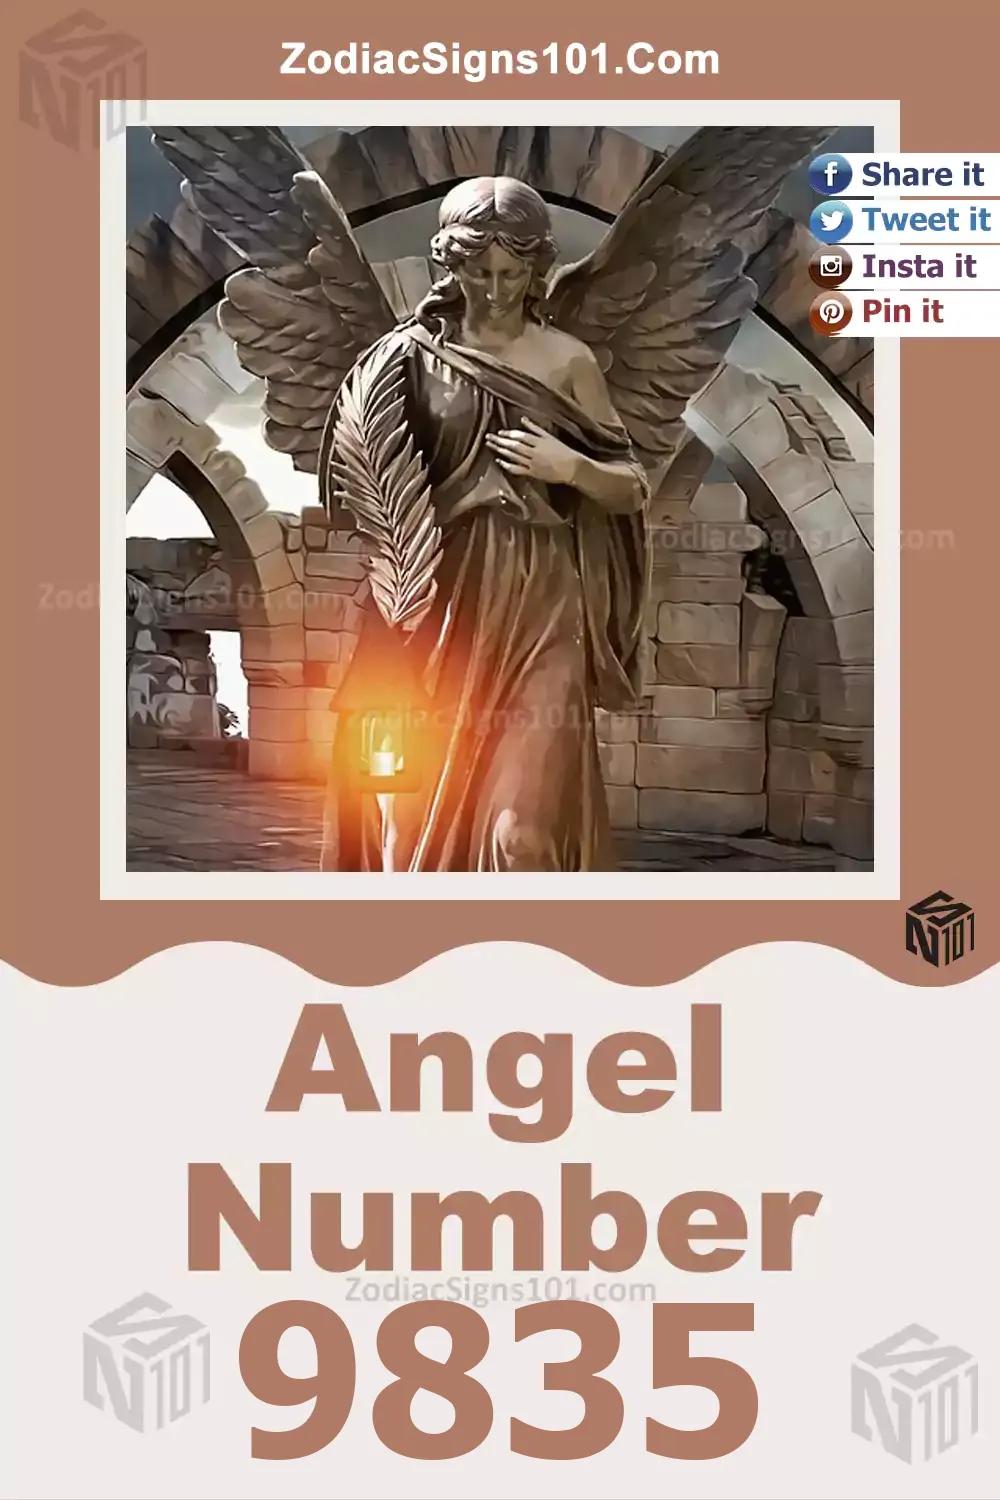 9835 Angel Number Meaning